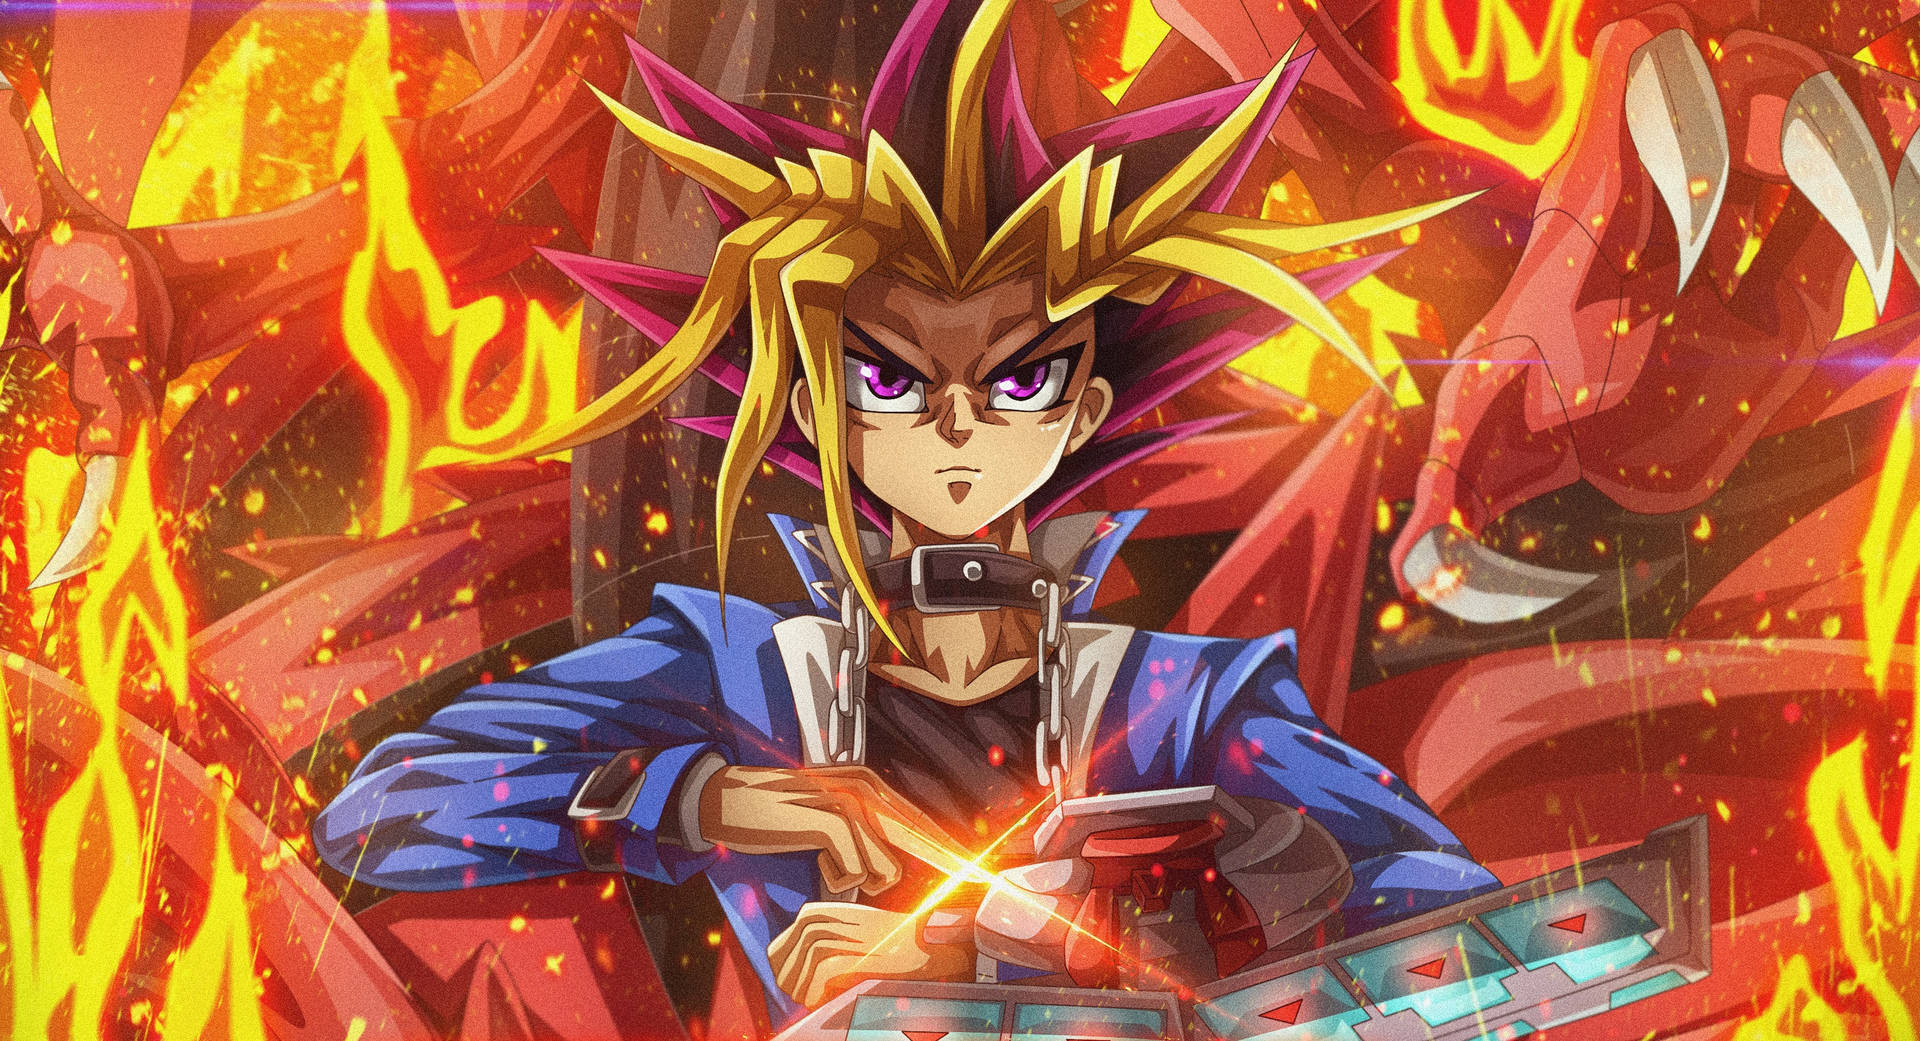 Yu Gi Oh Yugi With Red Dragon And Flames Wallpaper